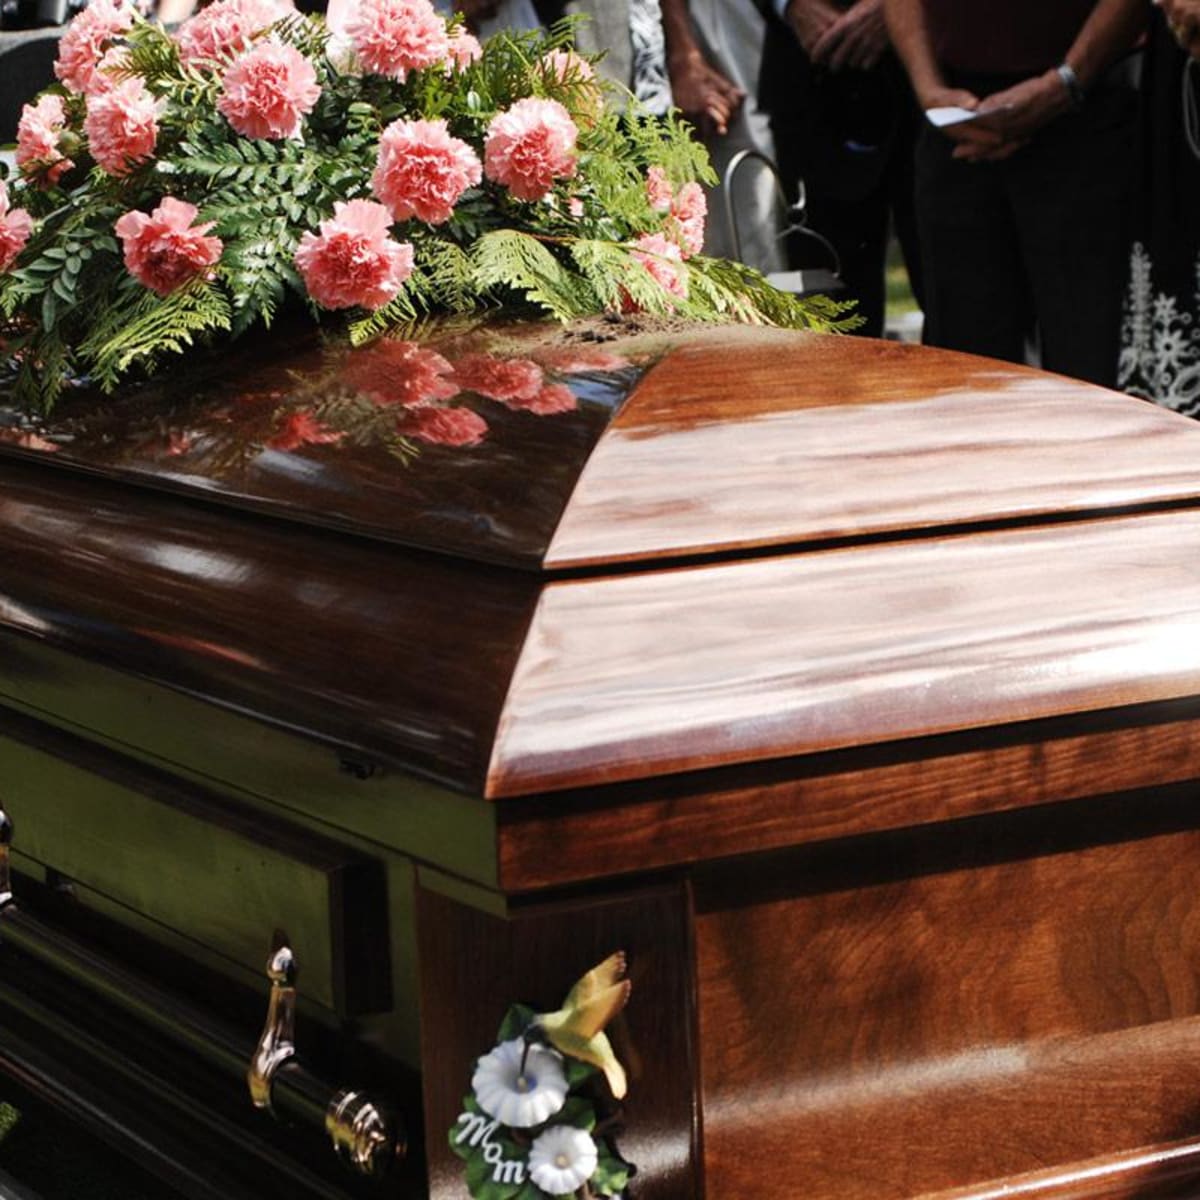 Significant Financial Losses for Funeral Providers during COVID-19